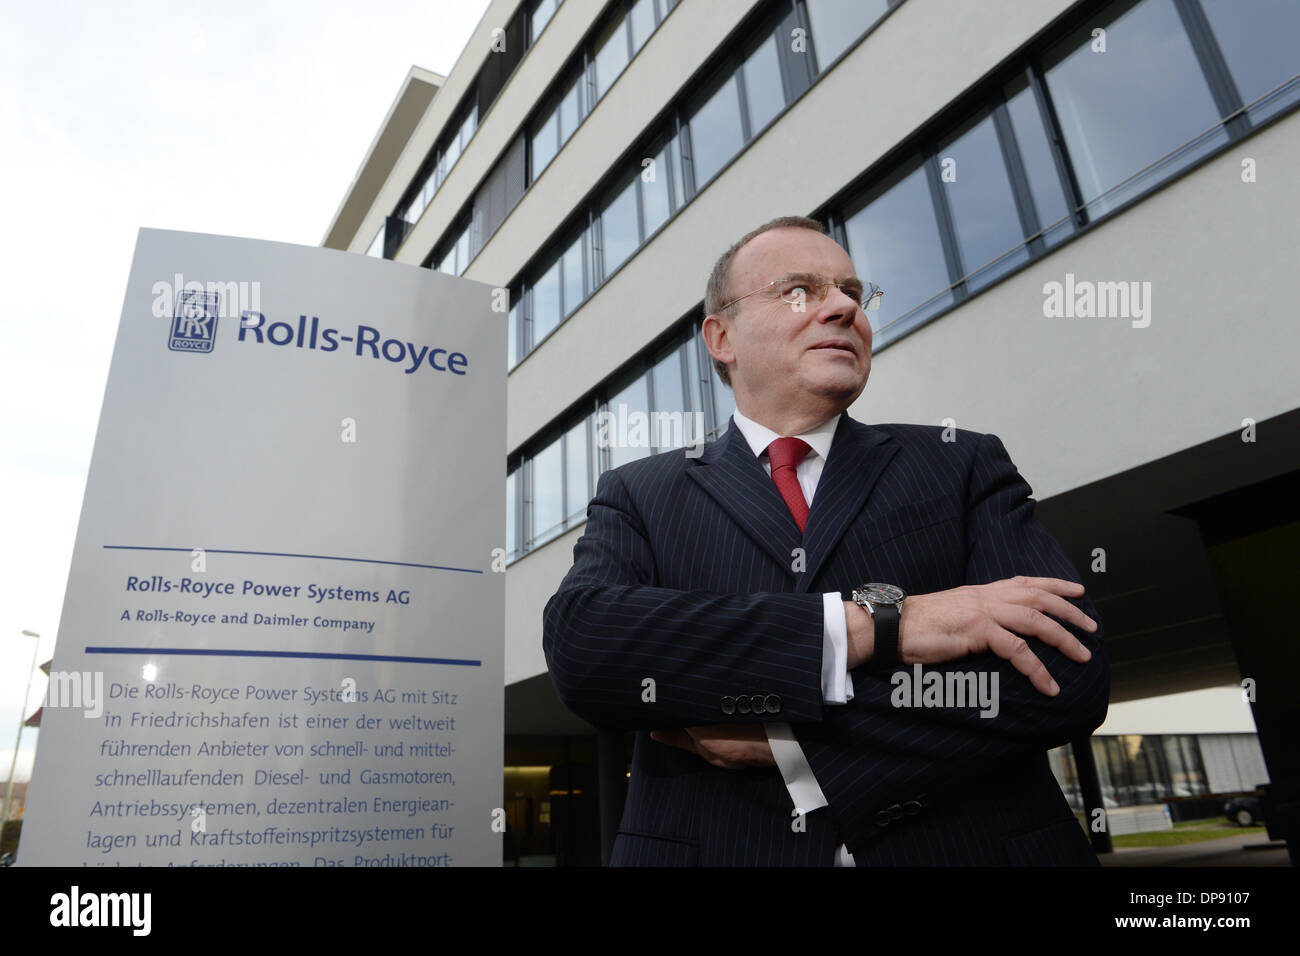 Friedrichshafen, Germany. 09th Jan, 2014. Ulrich Dohle, CEO of Rolls-Royce  Power Systems AG poses next to the new logo outside of the management  buildings after a press conference in Friedrichshafen, Germany, 09